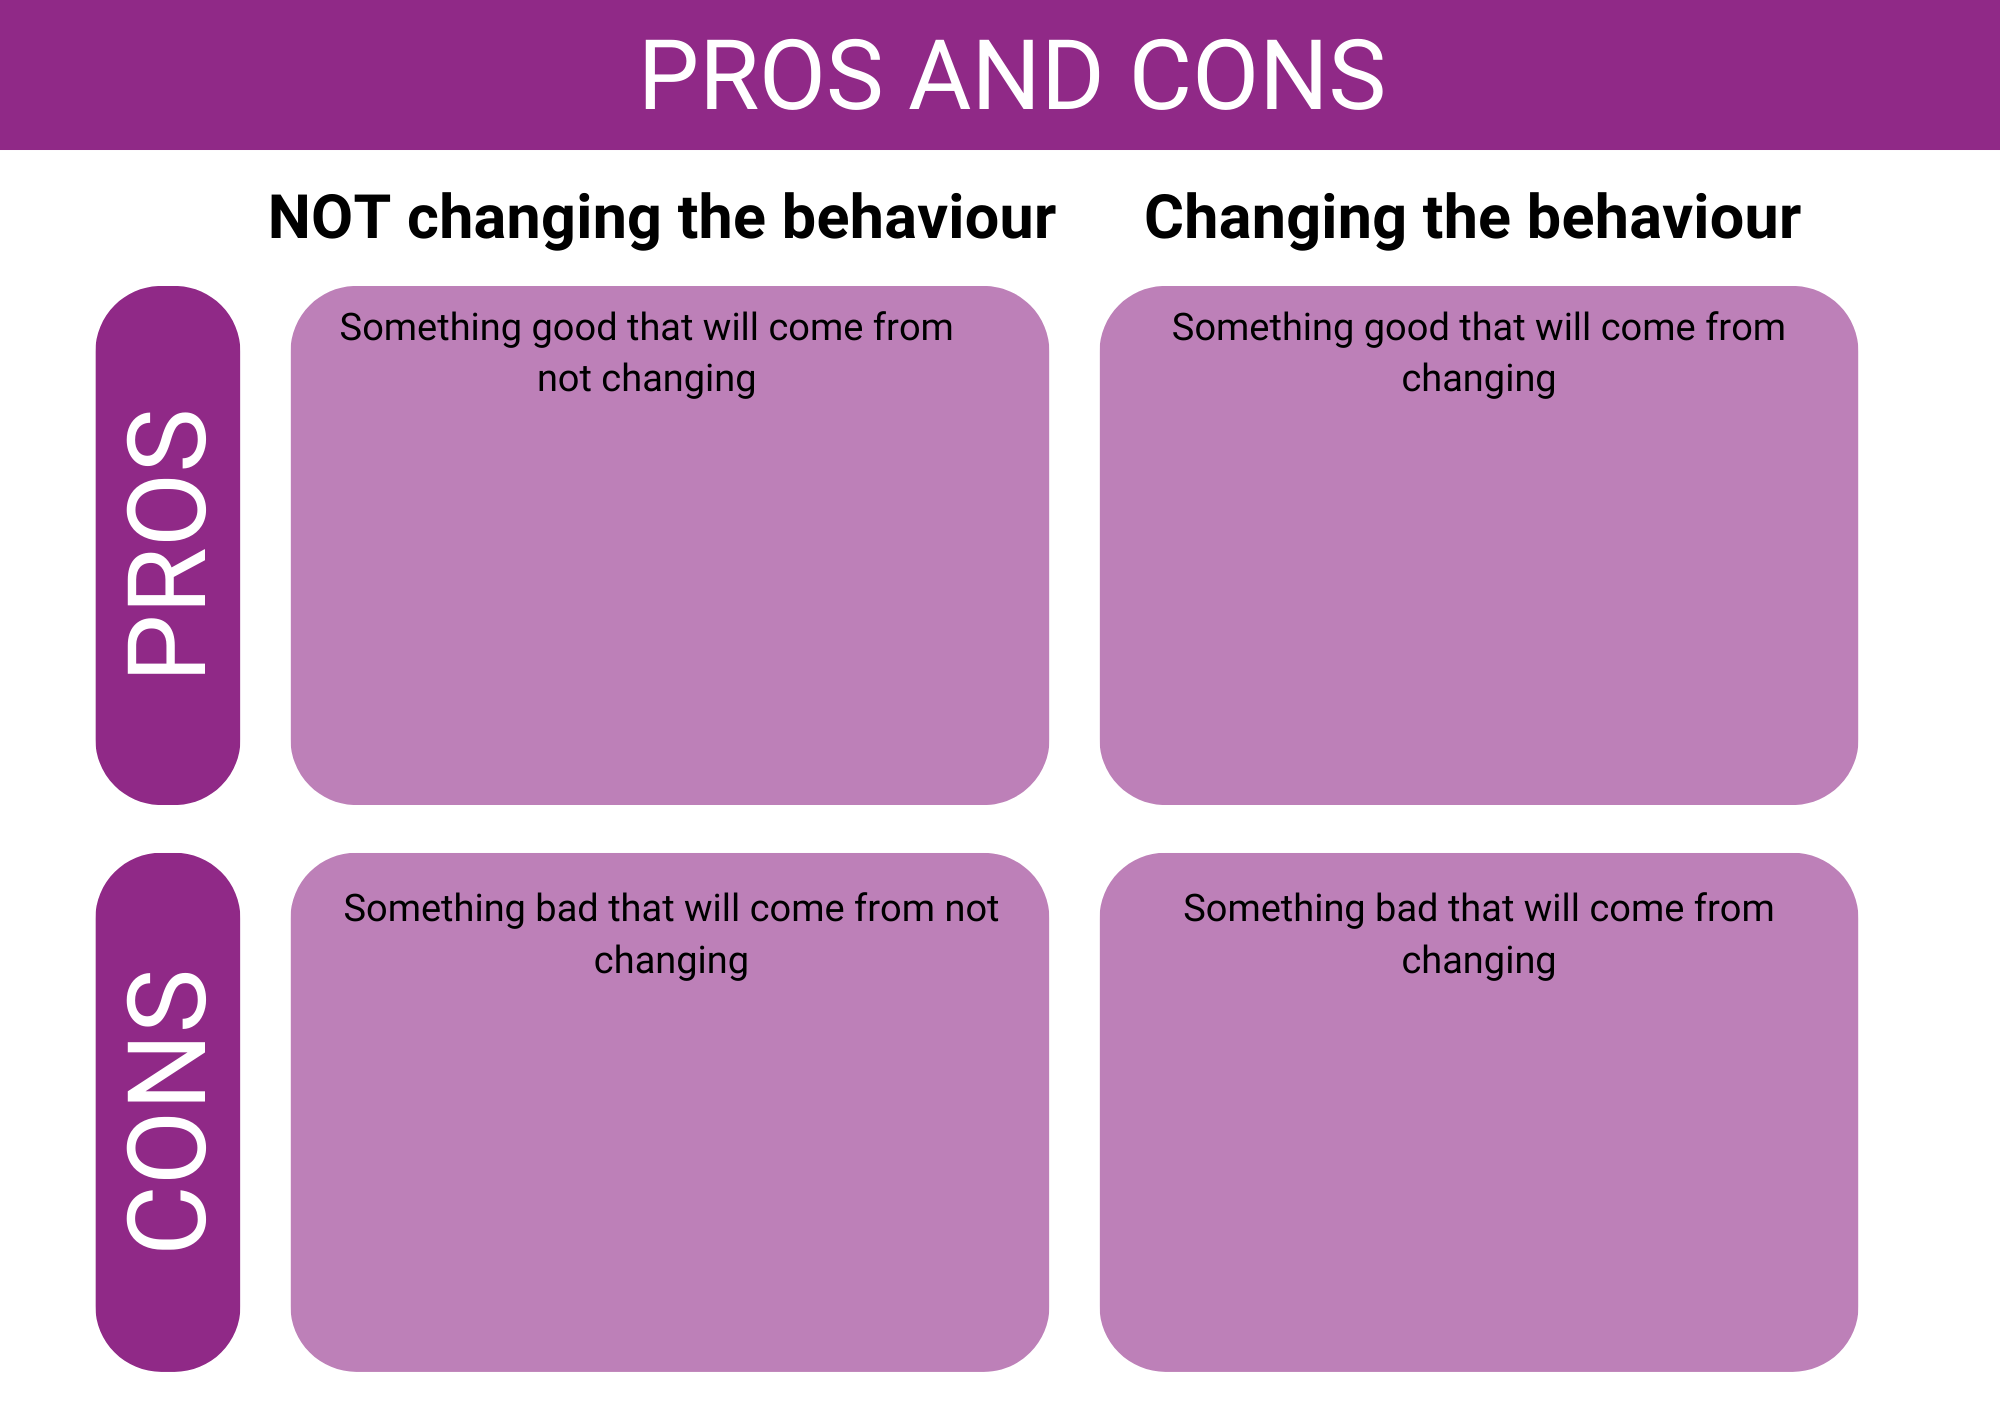 A grid containing space to write pros and cons of changing a behaviour and not changing a behaviour